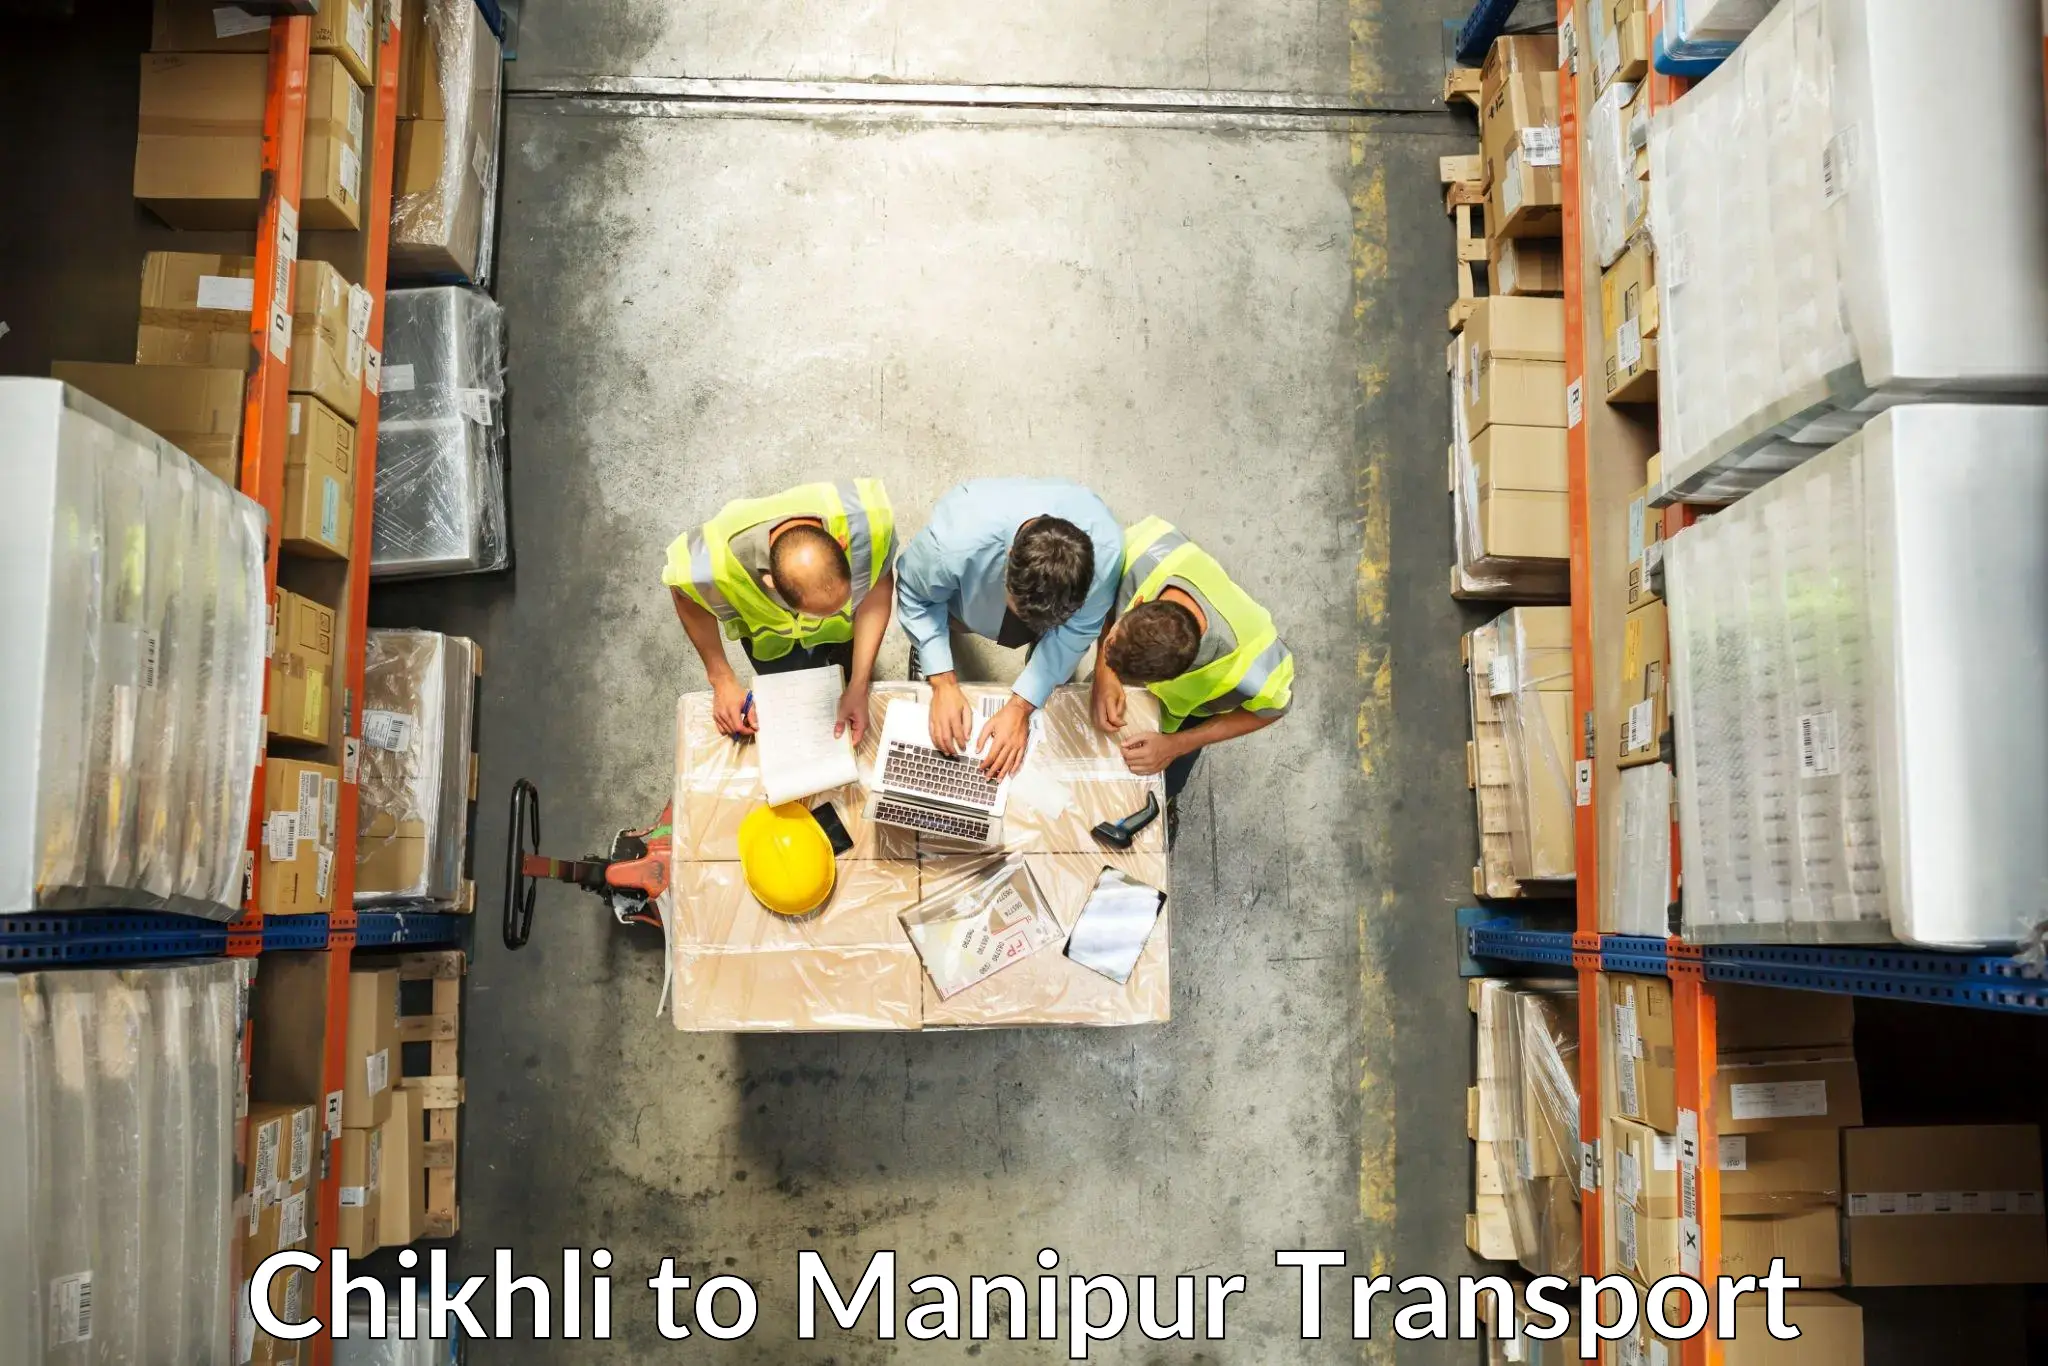 Daily parcel service transport Chikhli to Manipur